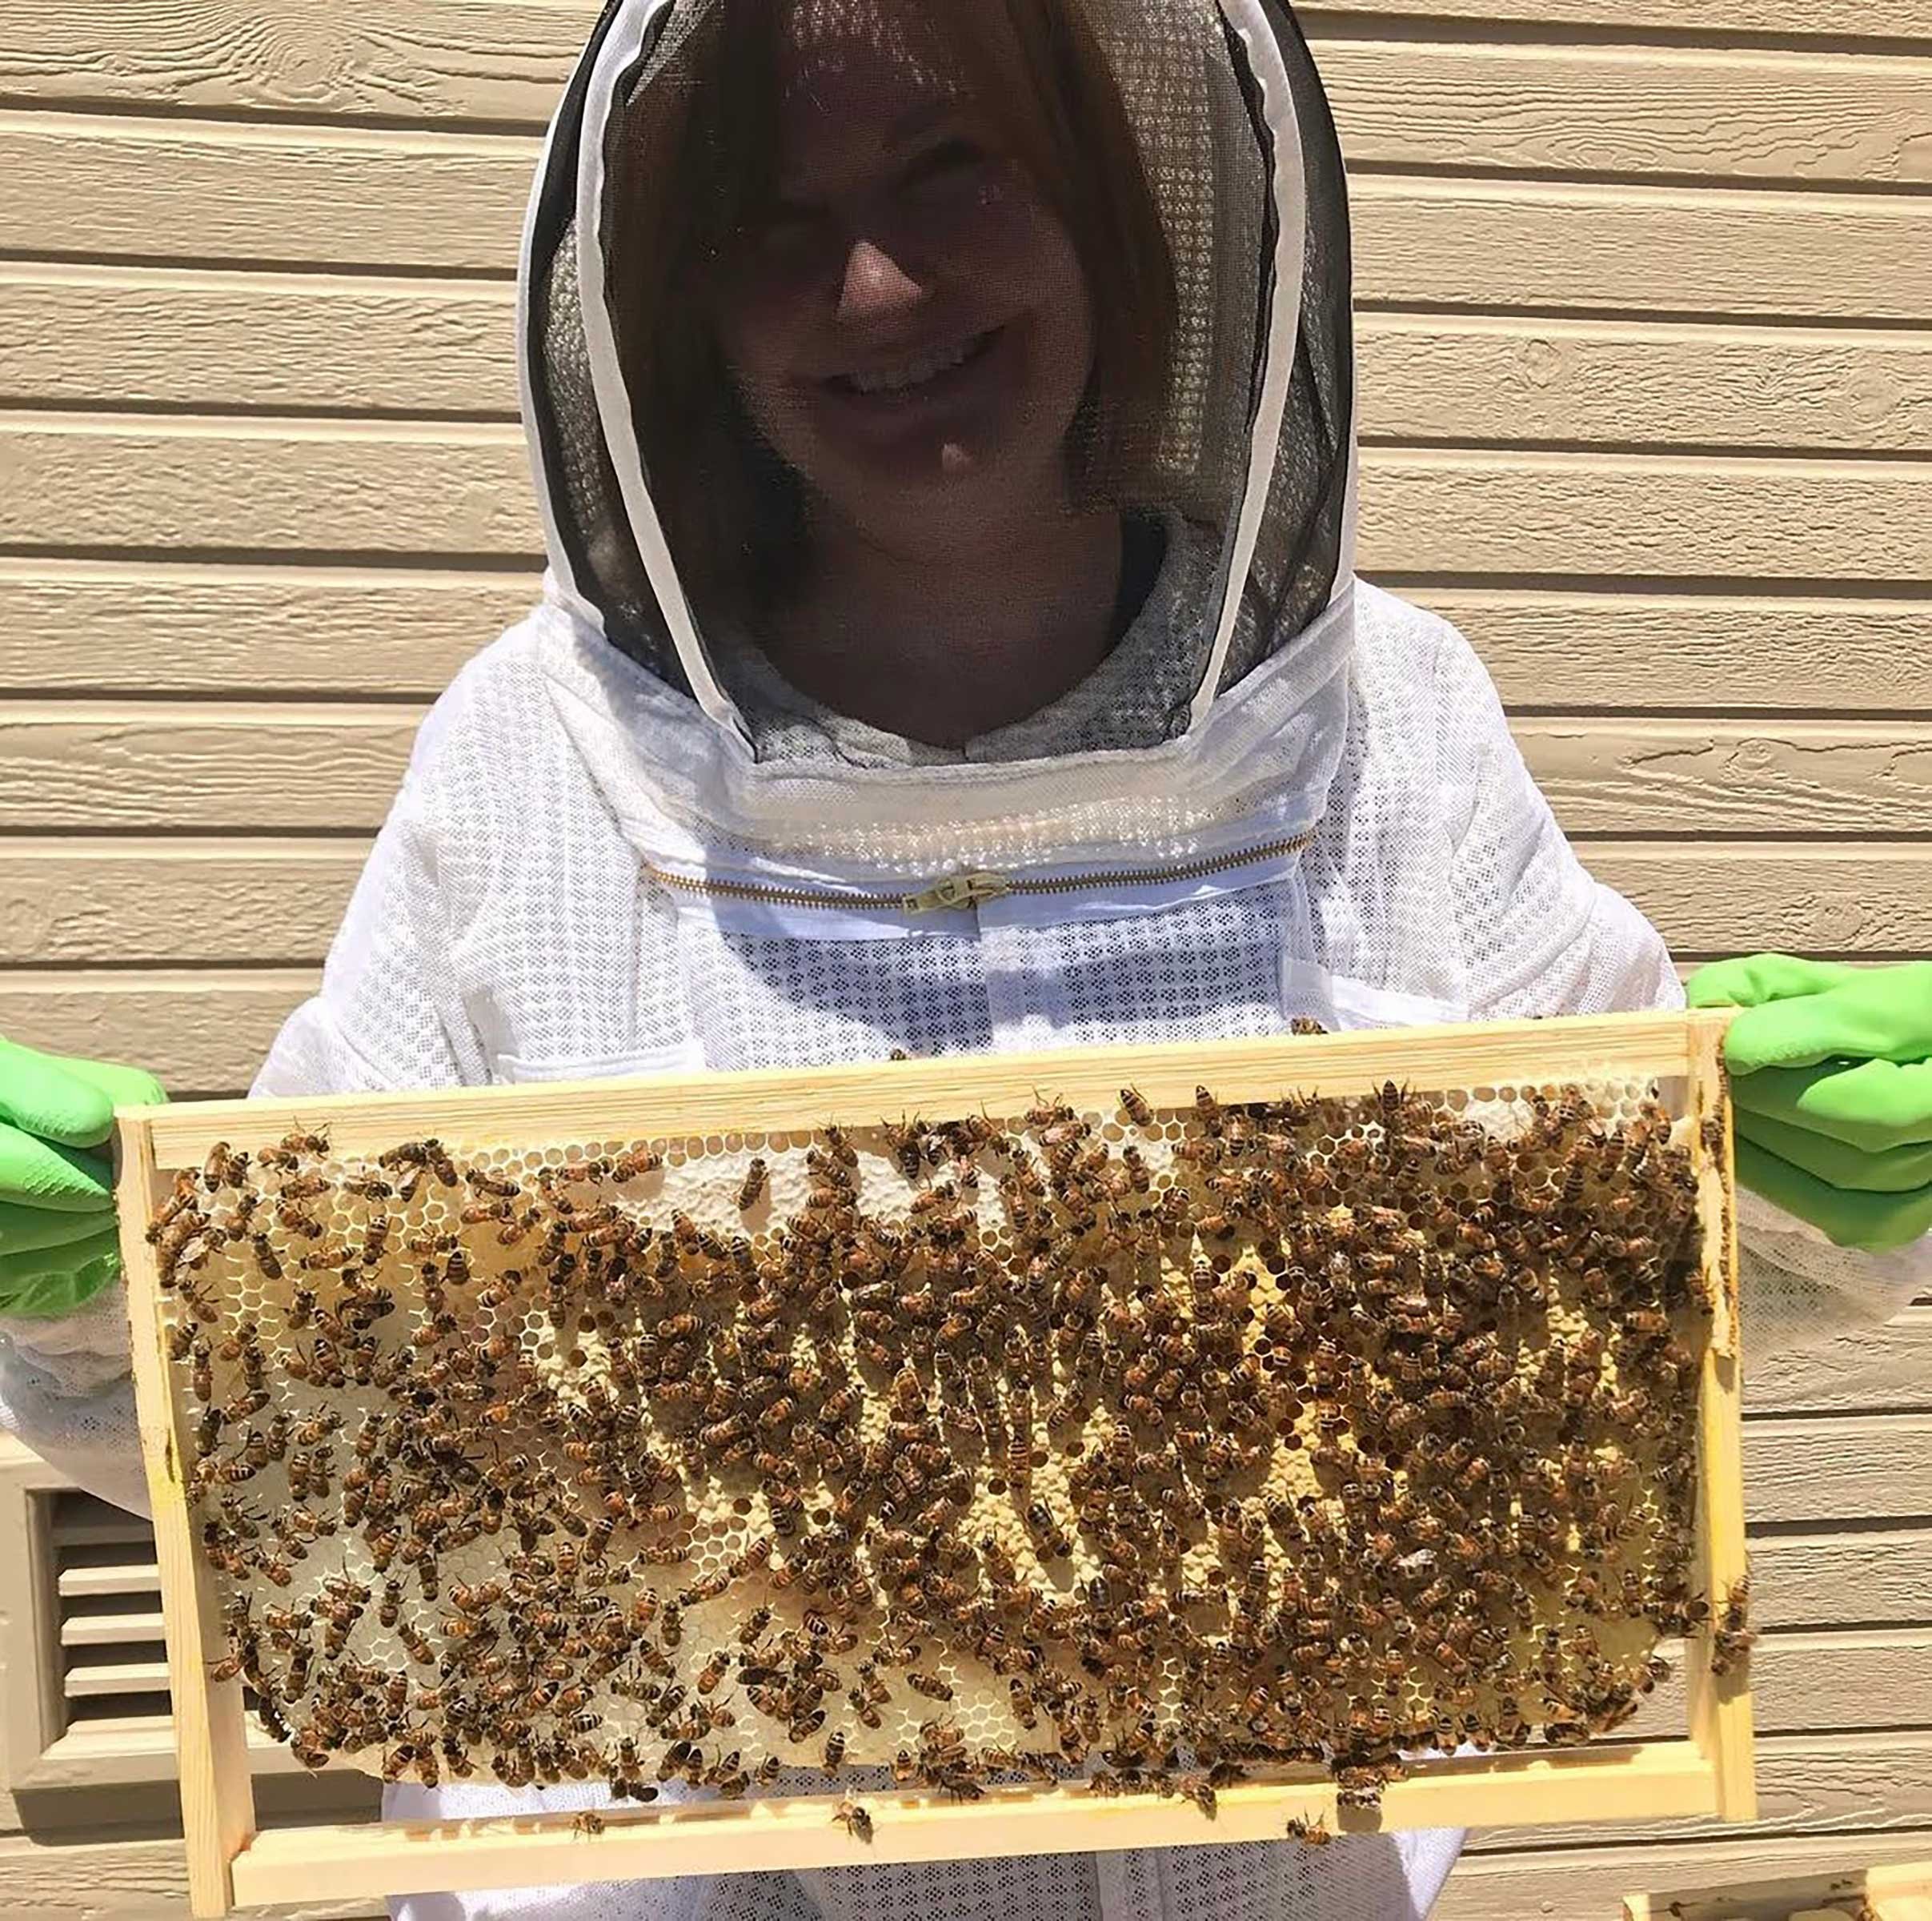 Susanna with her bees